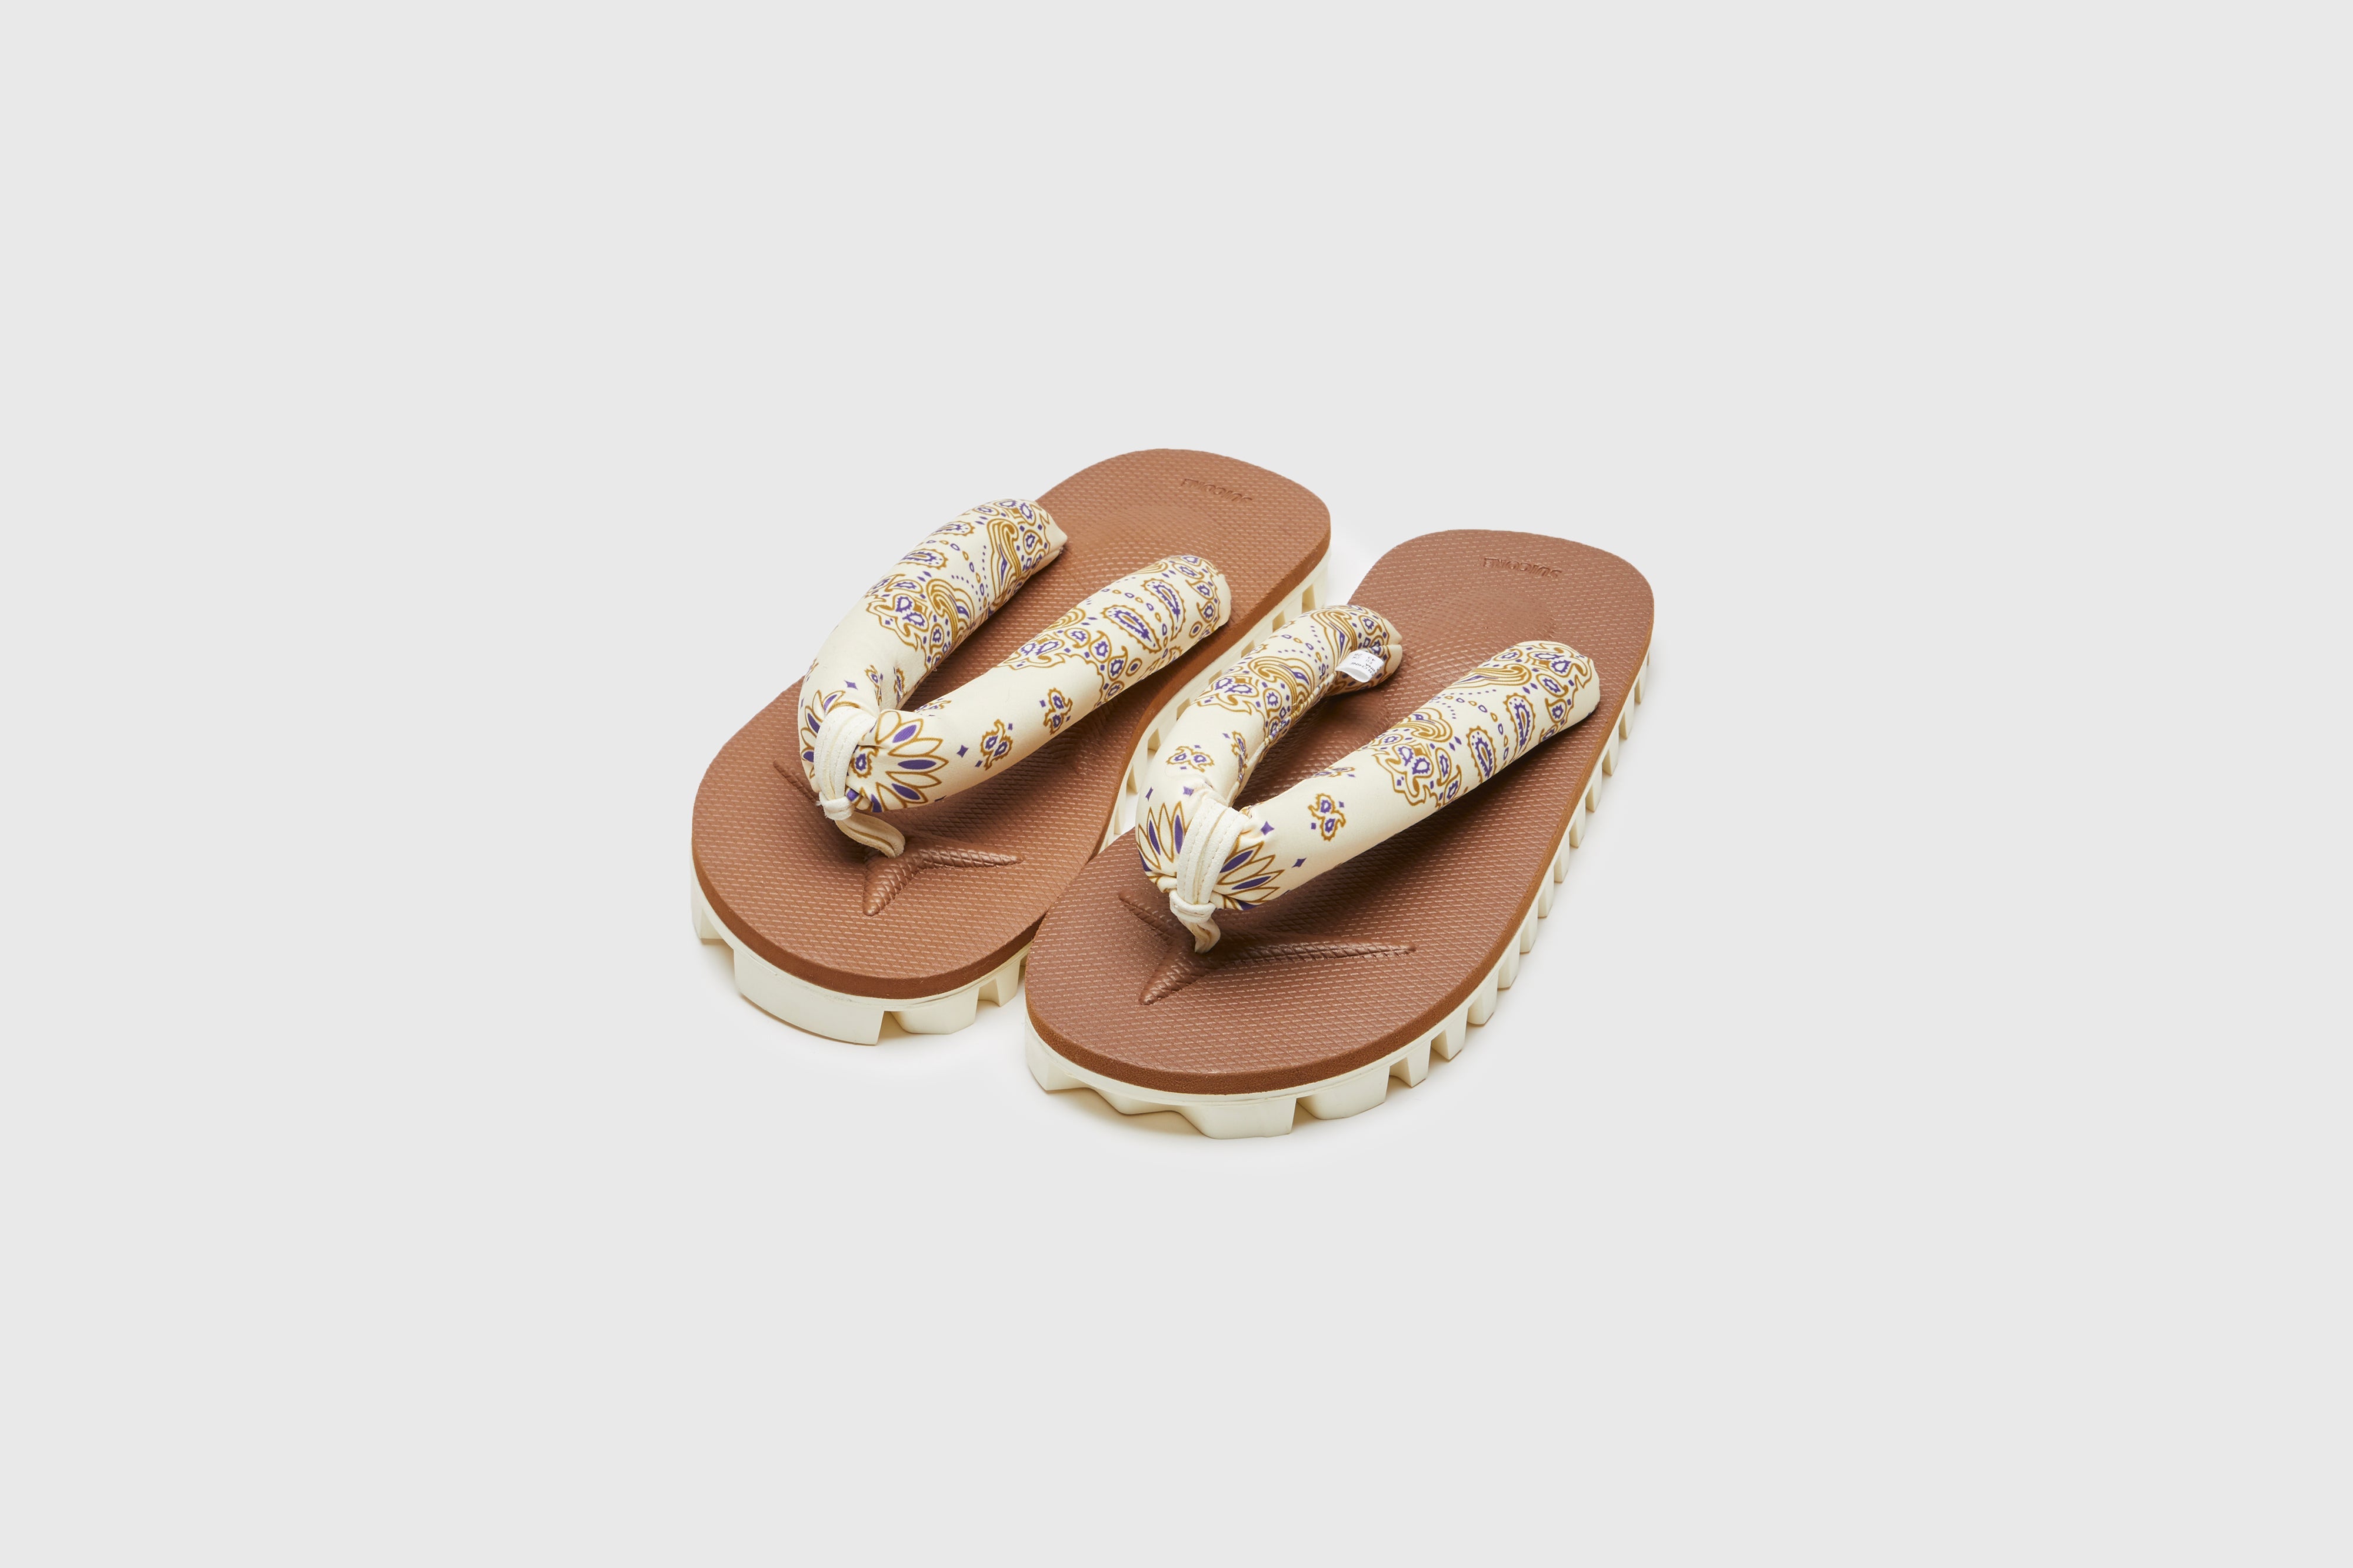 SUICOKE GTA-PT05 sandals with ivory &amp; brown nylon upper, ivory &amp; brown midsole and sole, straps and logo patch. From Spring/Summer 2023 collection on eightywingold Web Store, an official partner of SUICOKE. OG-226-PT05 IVORY X BROWN